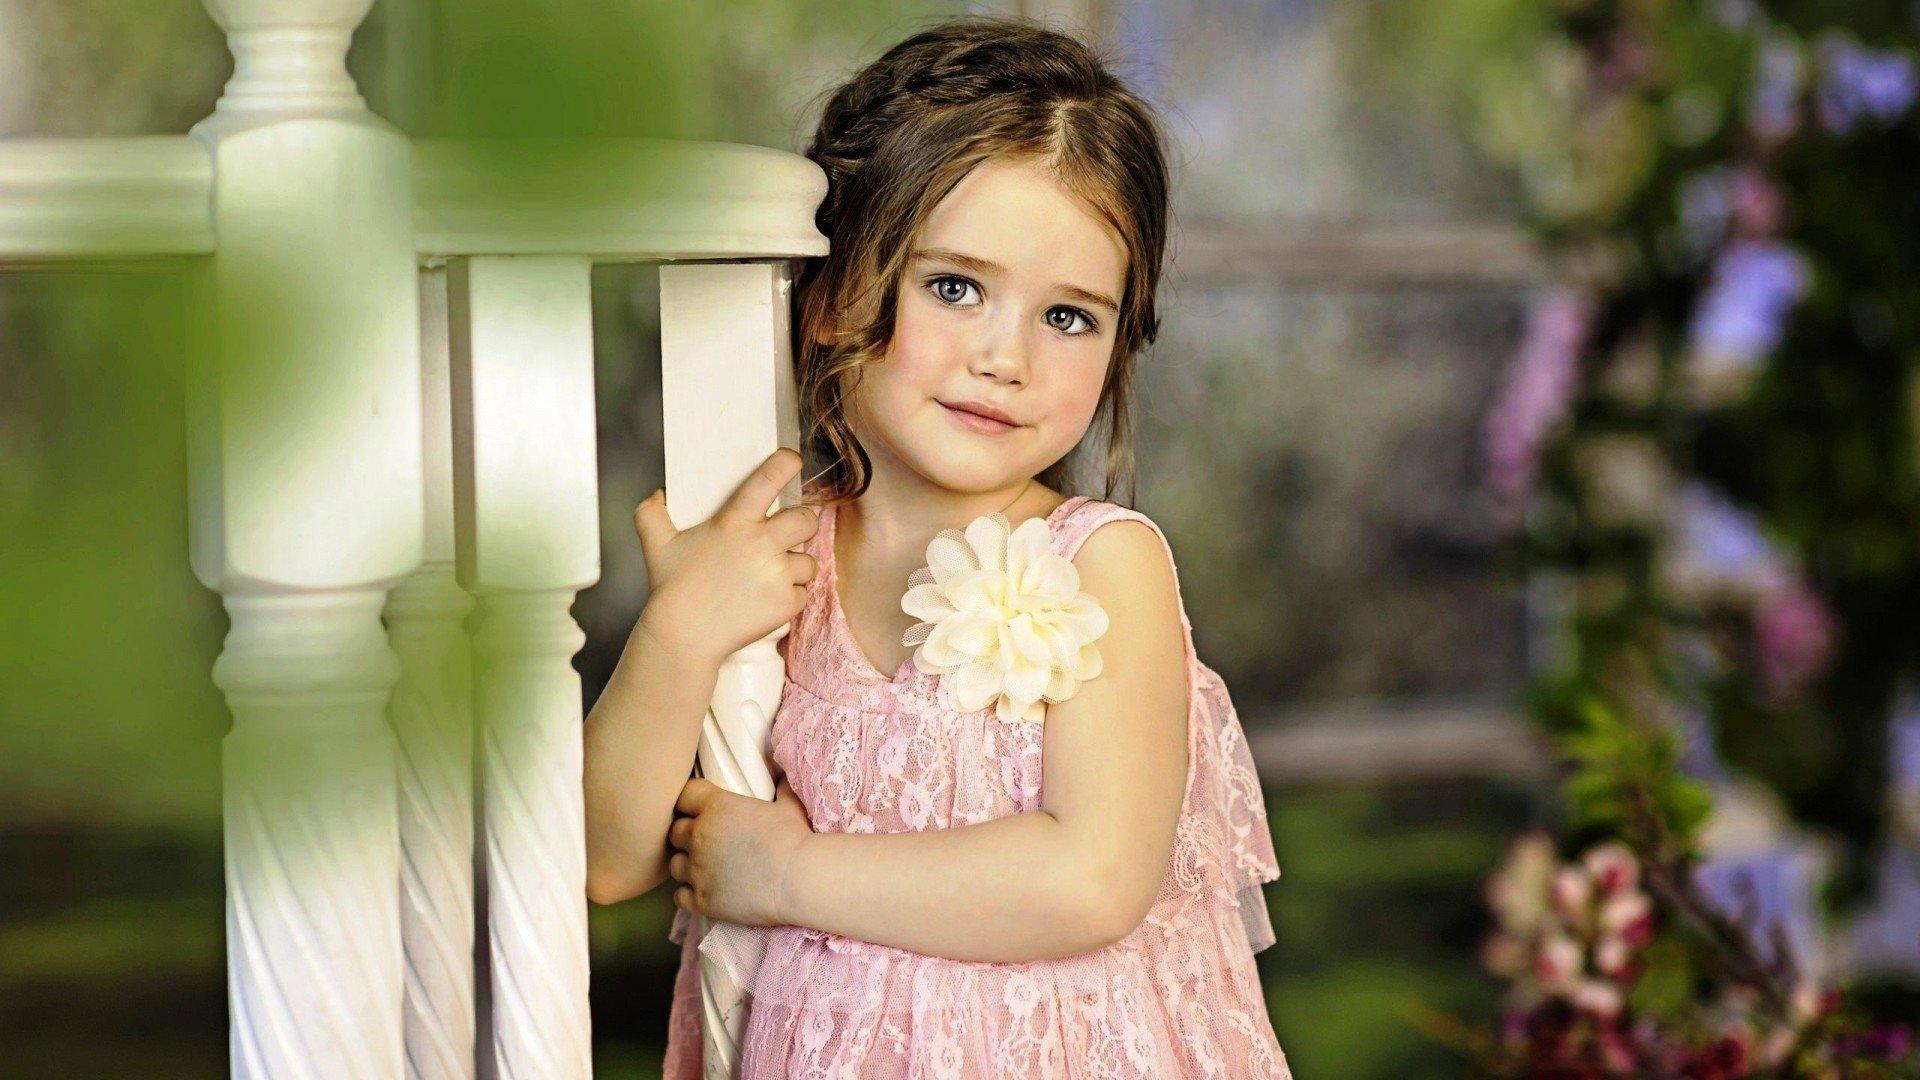 Adorable Little Girl HD Wallpaper. Background Imagex1080